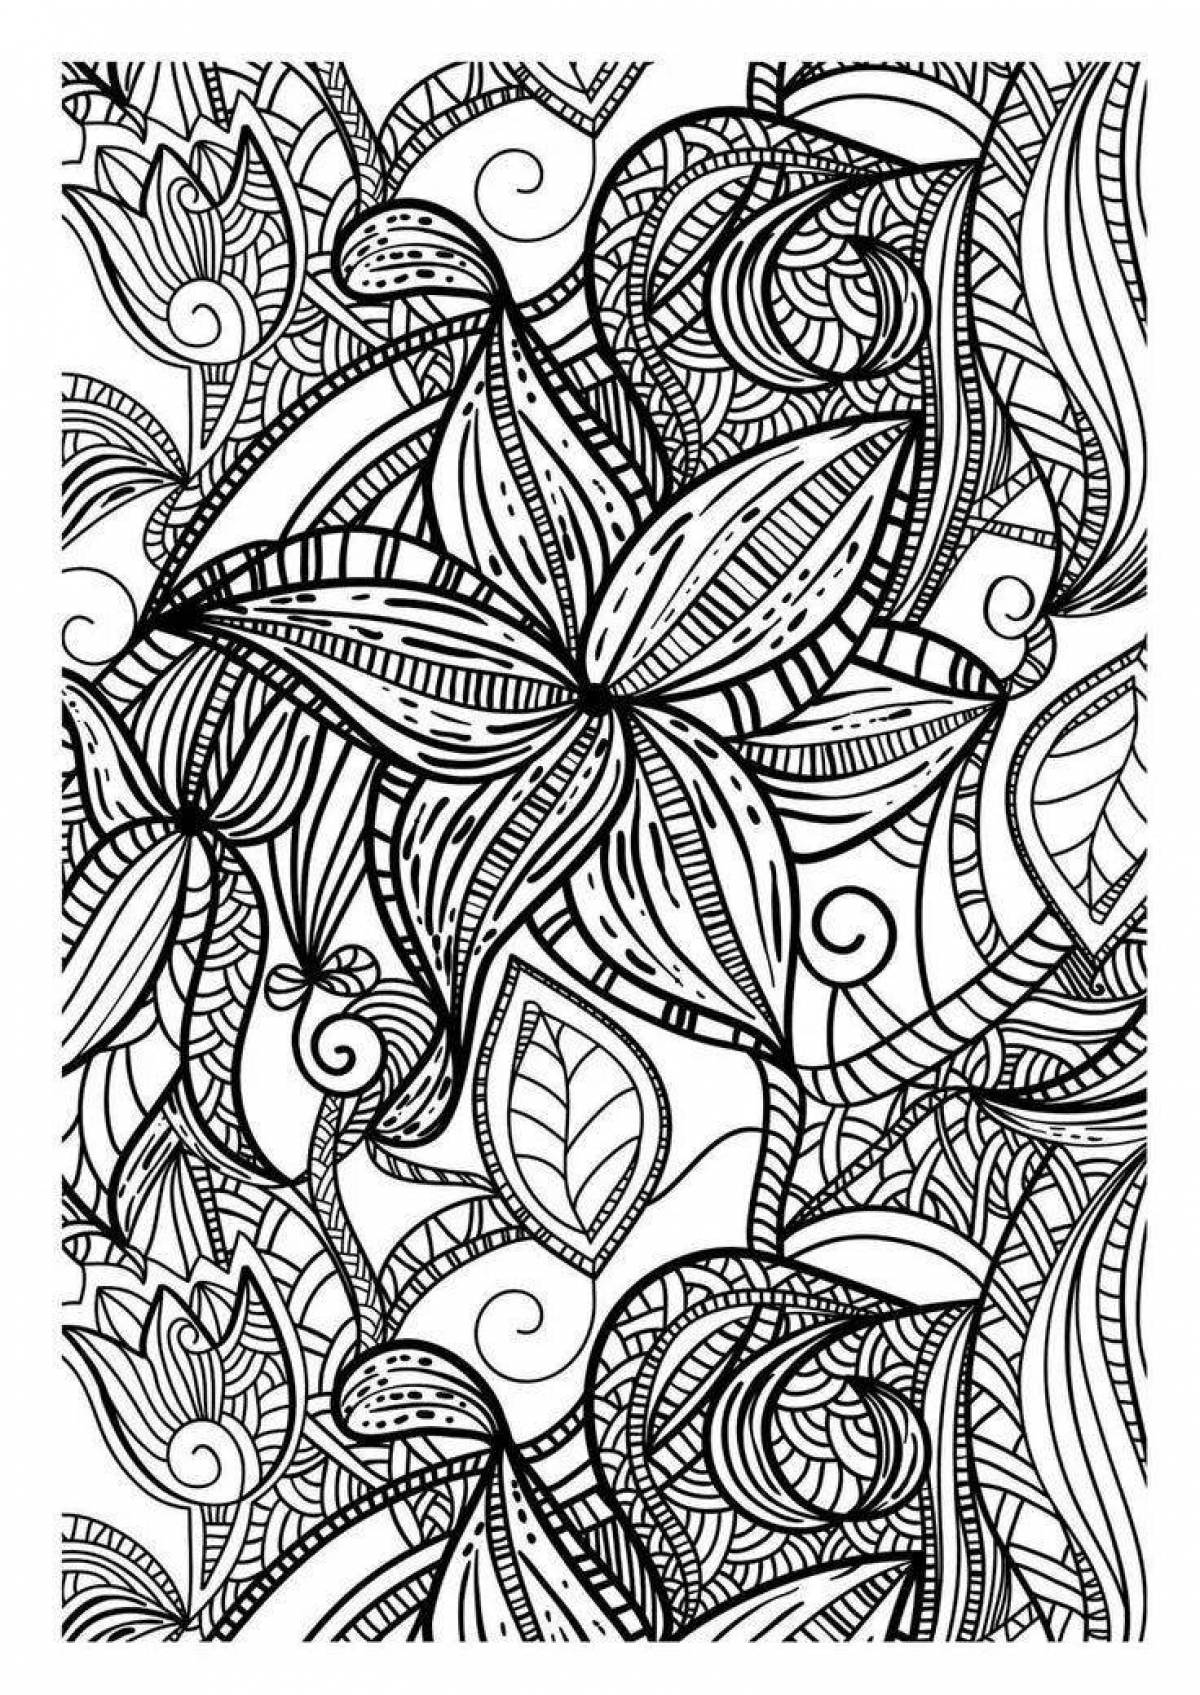 Coloring book soothing anti-stress art therapy